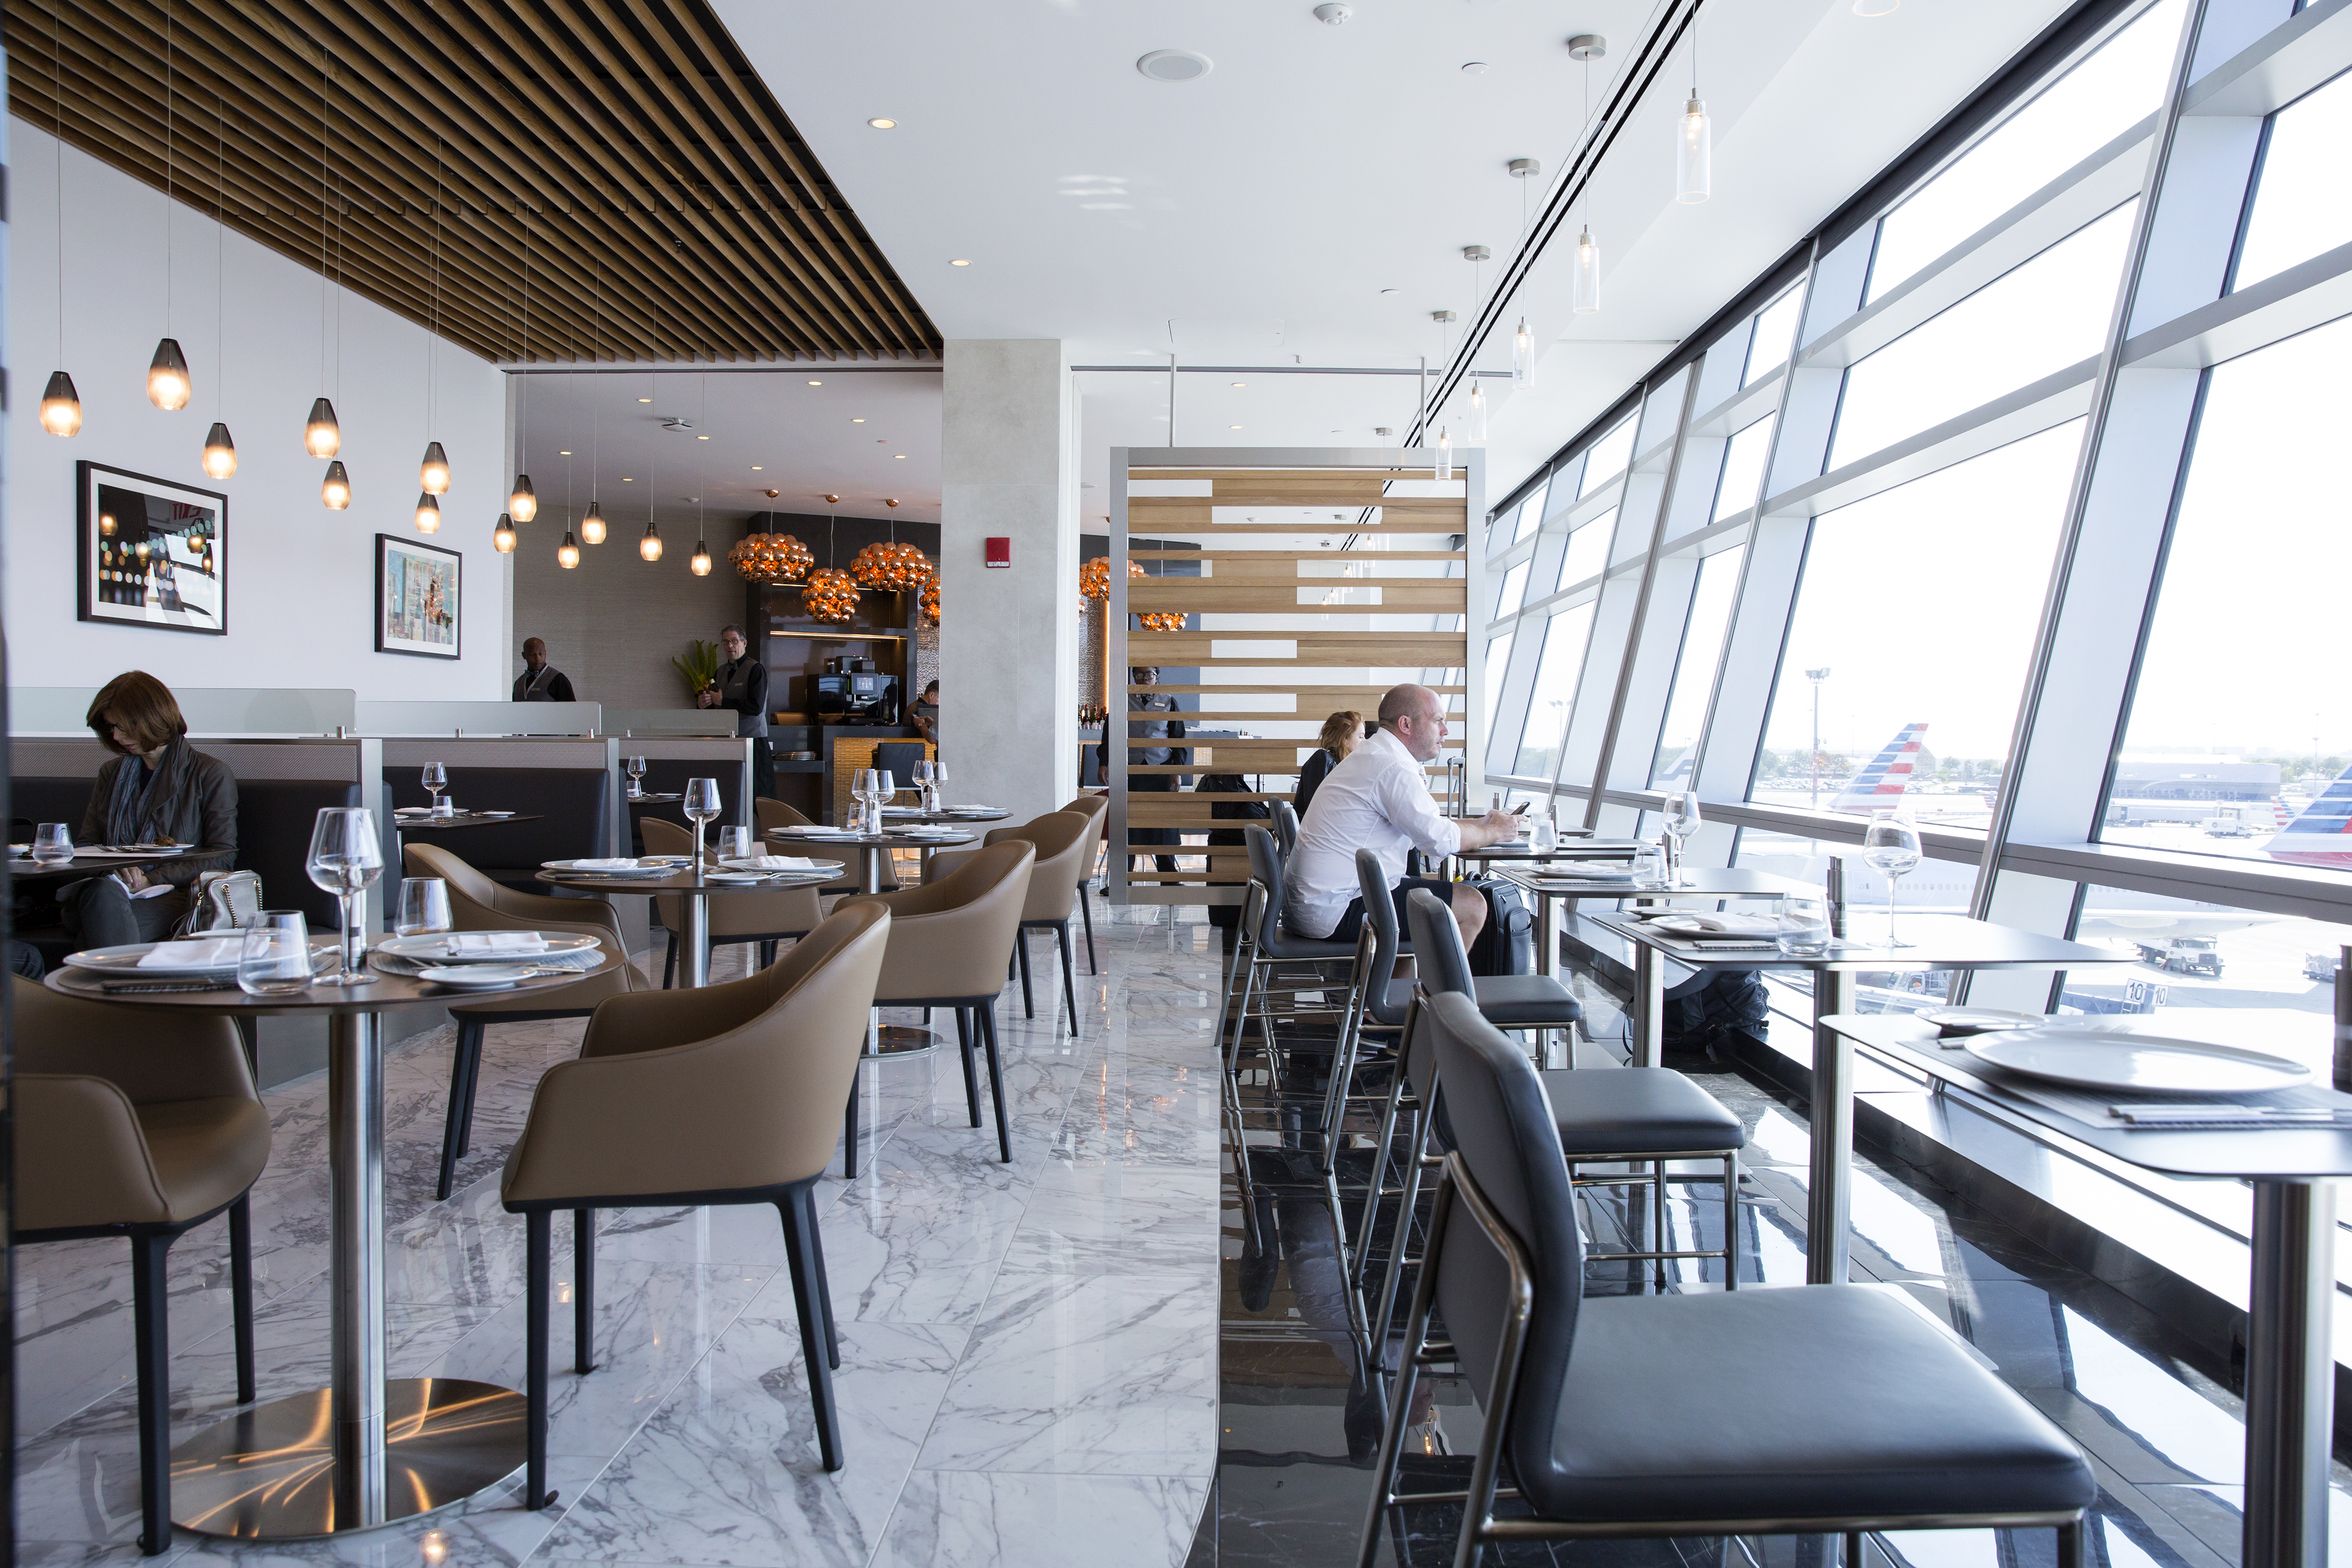 Customers sit inside the American Airlines Group Inc. Flagship First Dining room at John F. Kennedy International Airport (JFK) in New York, U.S., on Thursday, June 15, 2017. American Airlines opened its first full service restaurant-style dining room for transcontinental first class travelers, keeping the amenity highly exclusive focusing on premium customers. Photographer: Caitlin Ochs/Bloomberg via Getty Images (Bloomberg&mdash;Bloomberg via Getty Images)